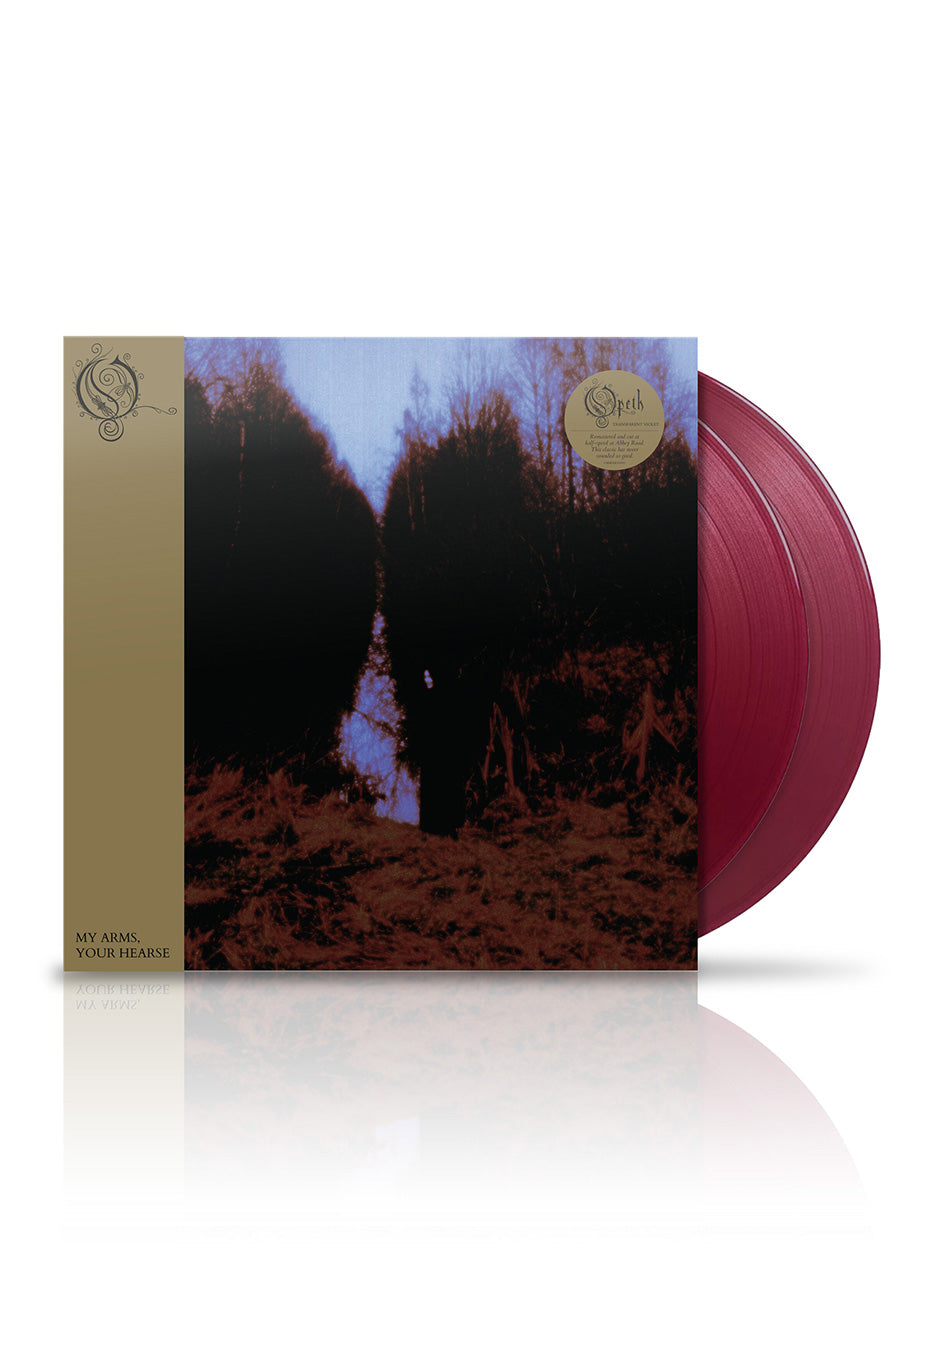 Opeth - My Arms Your Hearse Ltd. Violet - Colored 2 Vinyl